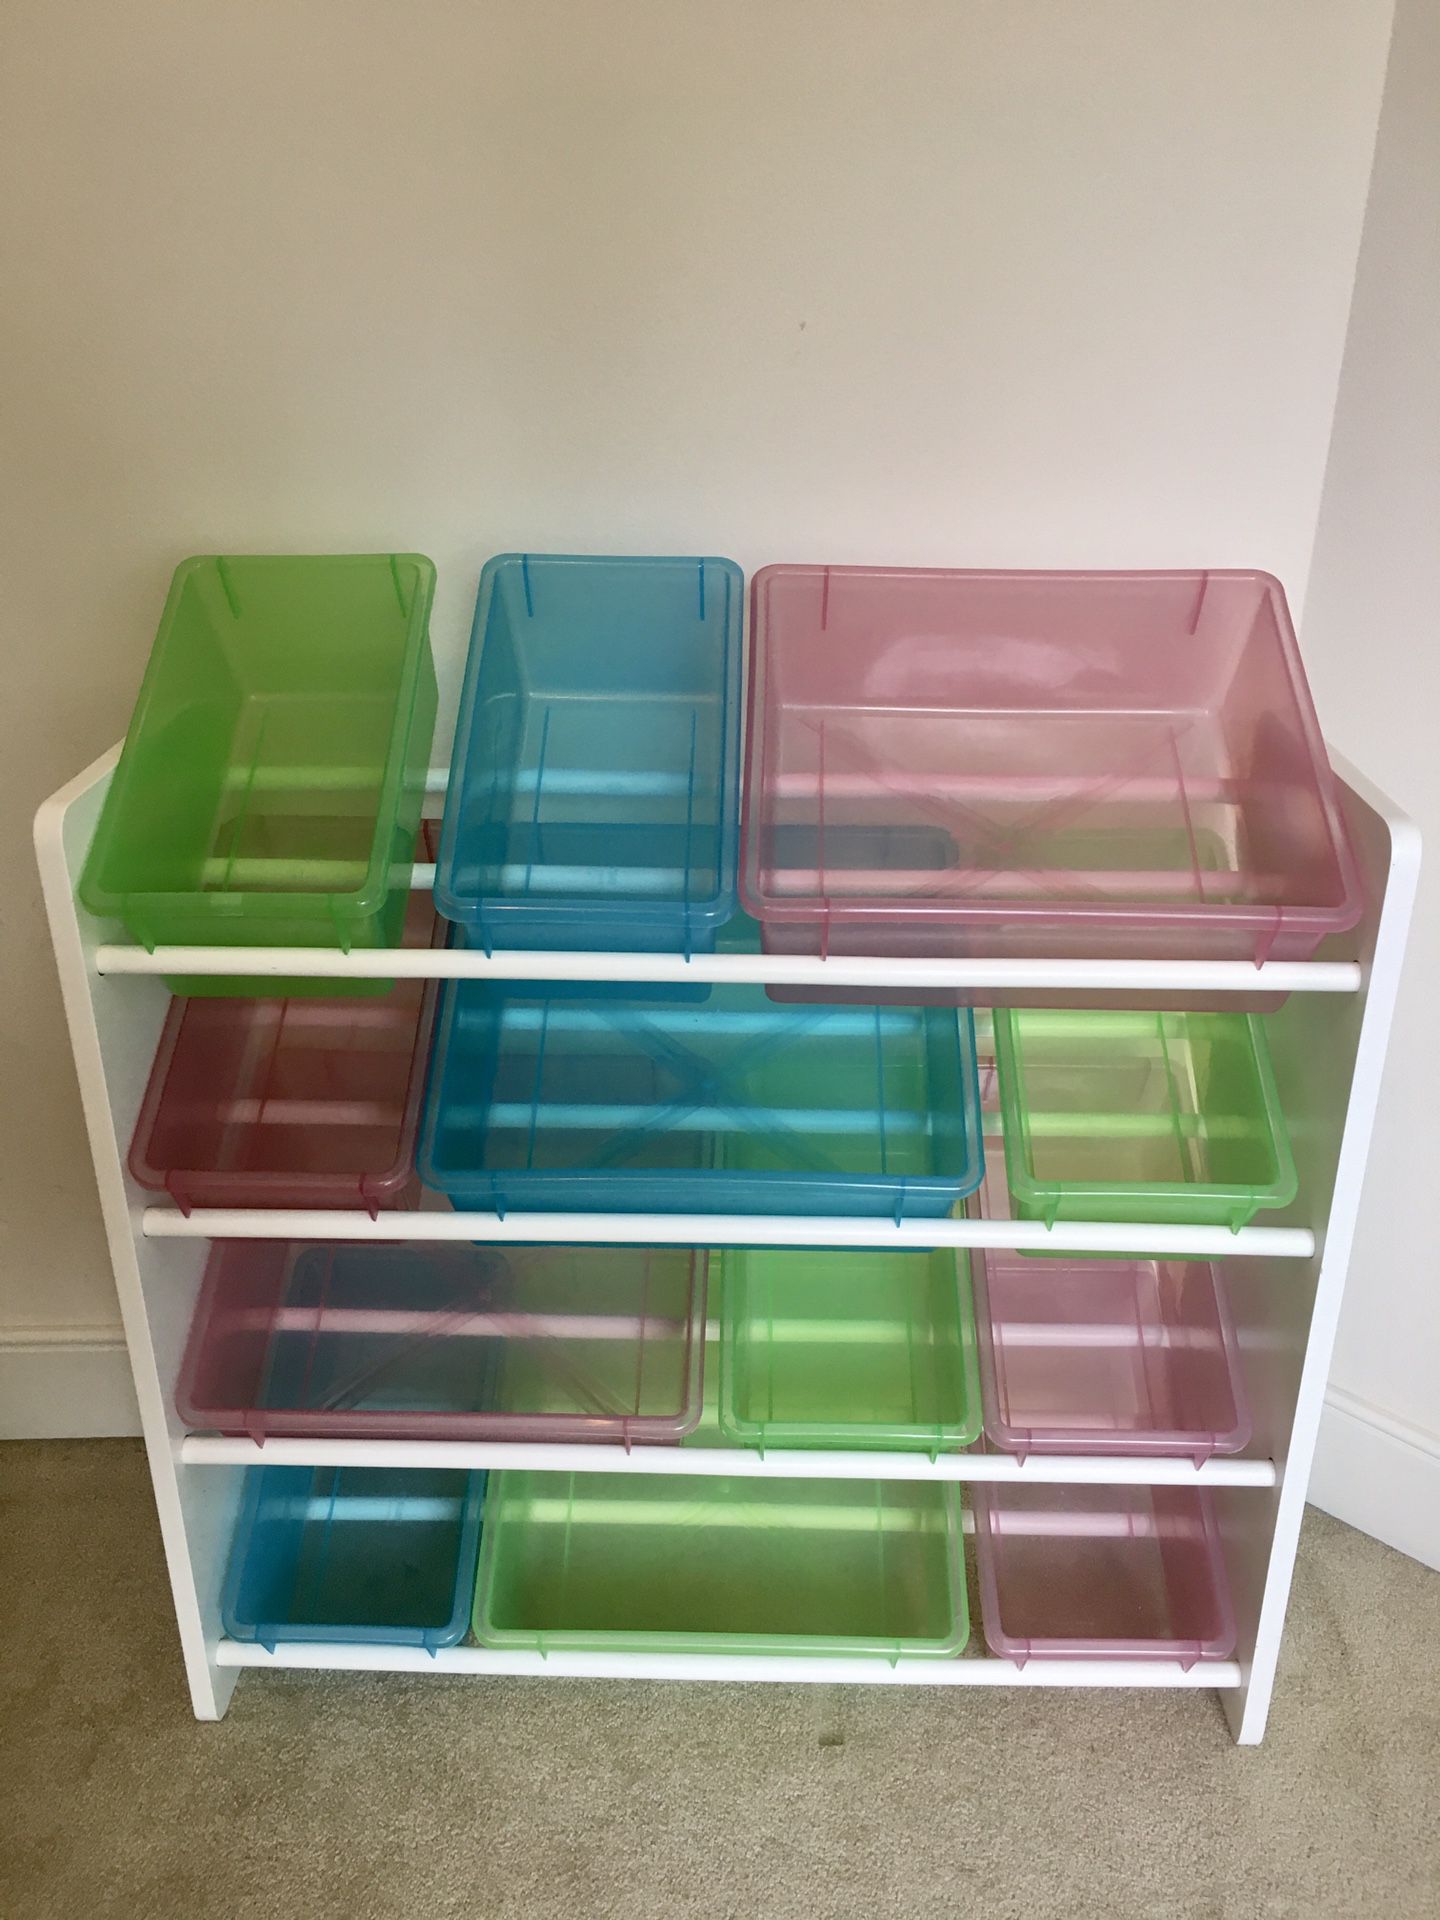 Pending pickup - Kids toy storage and organizer with 12 bins